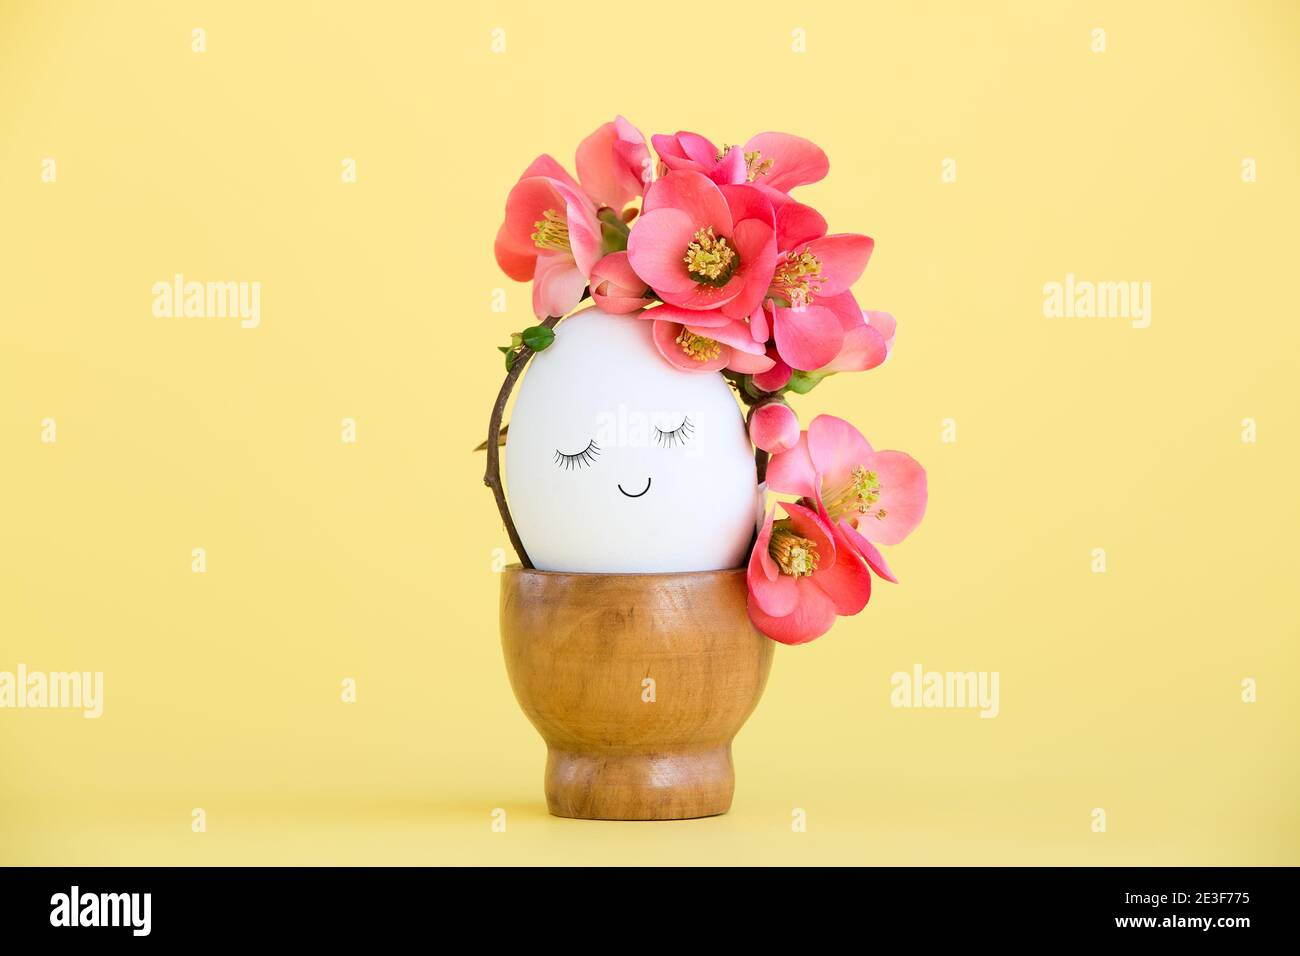 Cute egg with a painted face and spring flowers on a yellow background. Creative concept for Easter Stock Photo